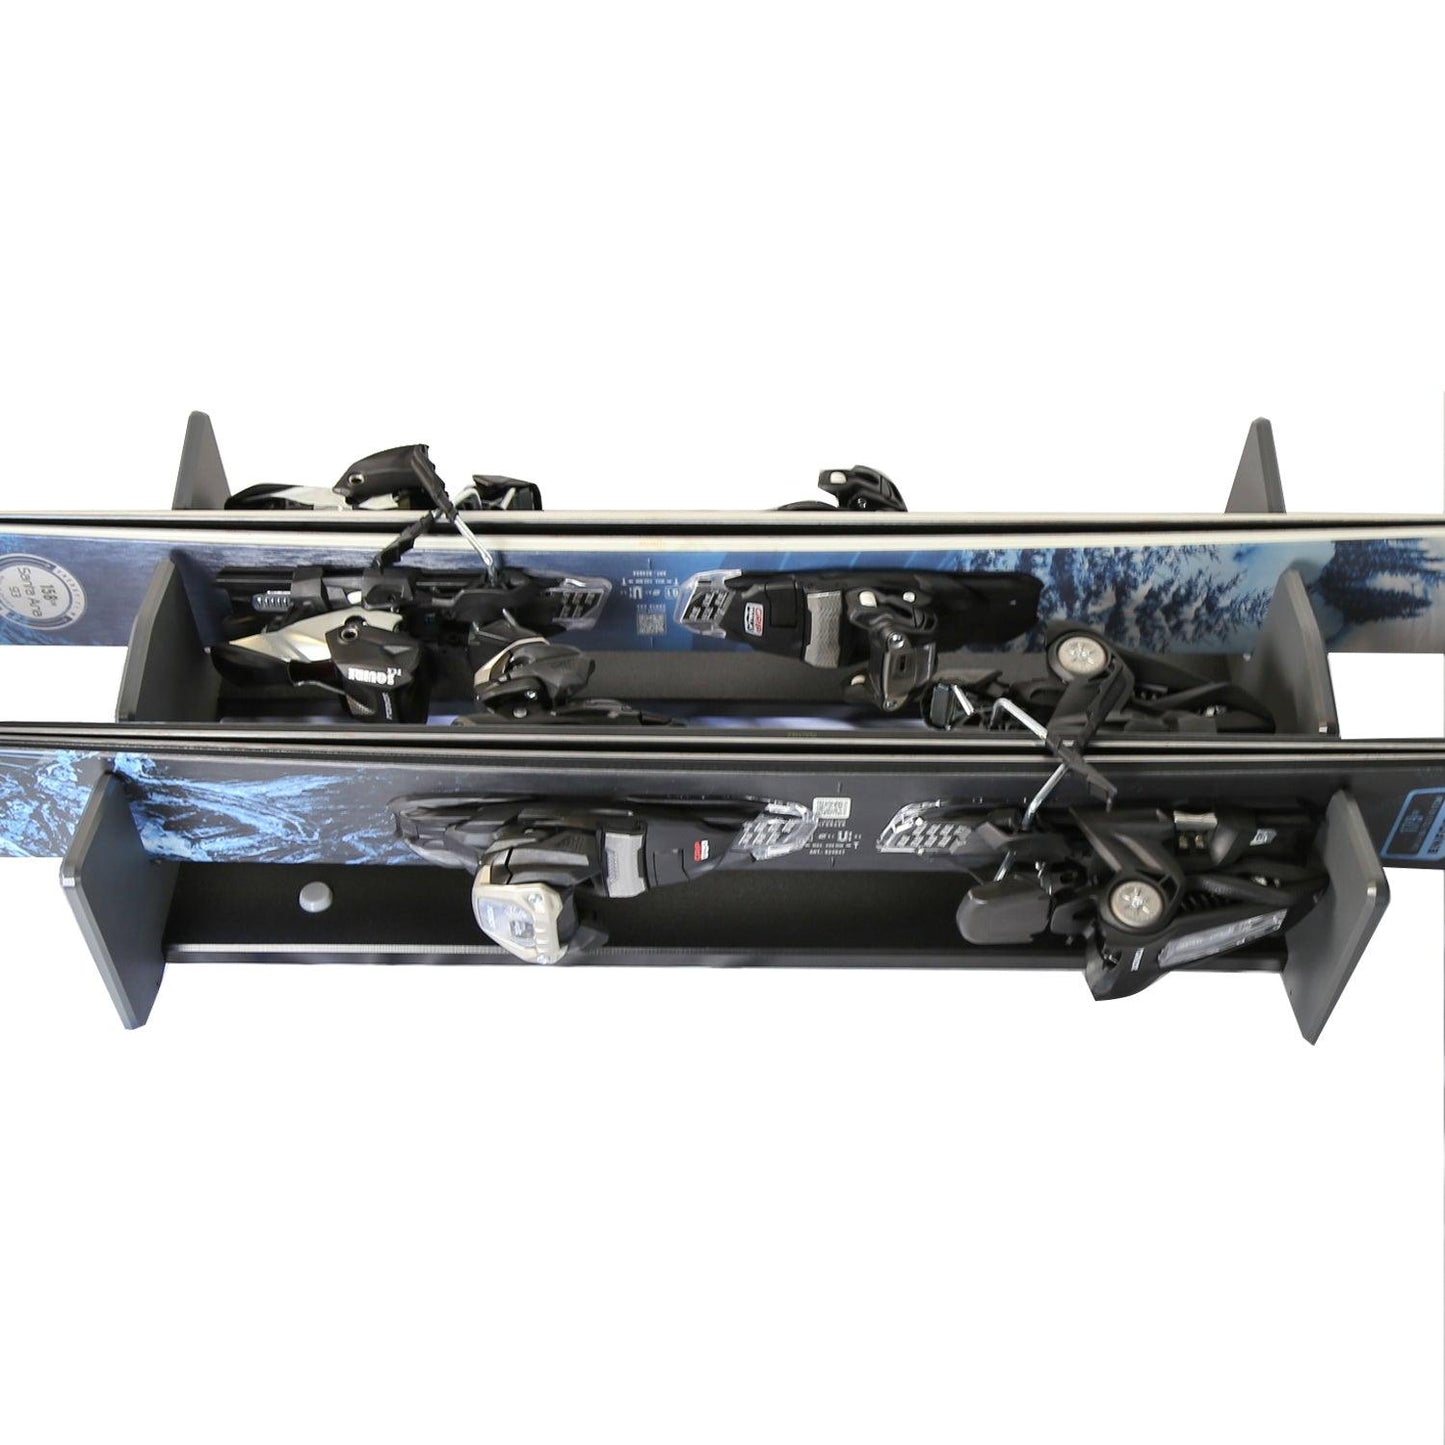 TRAPSKI LowPro 2 S Ski and Snowboard Rack Insert for Rooftop Cargo Box | High Quality Marine Grade HDPE Plastic | UV Protected | Premium Strap Included | 3 Year Warranty | Made in the USA - TRAPSKI, LLC